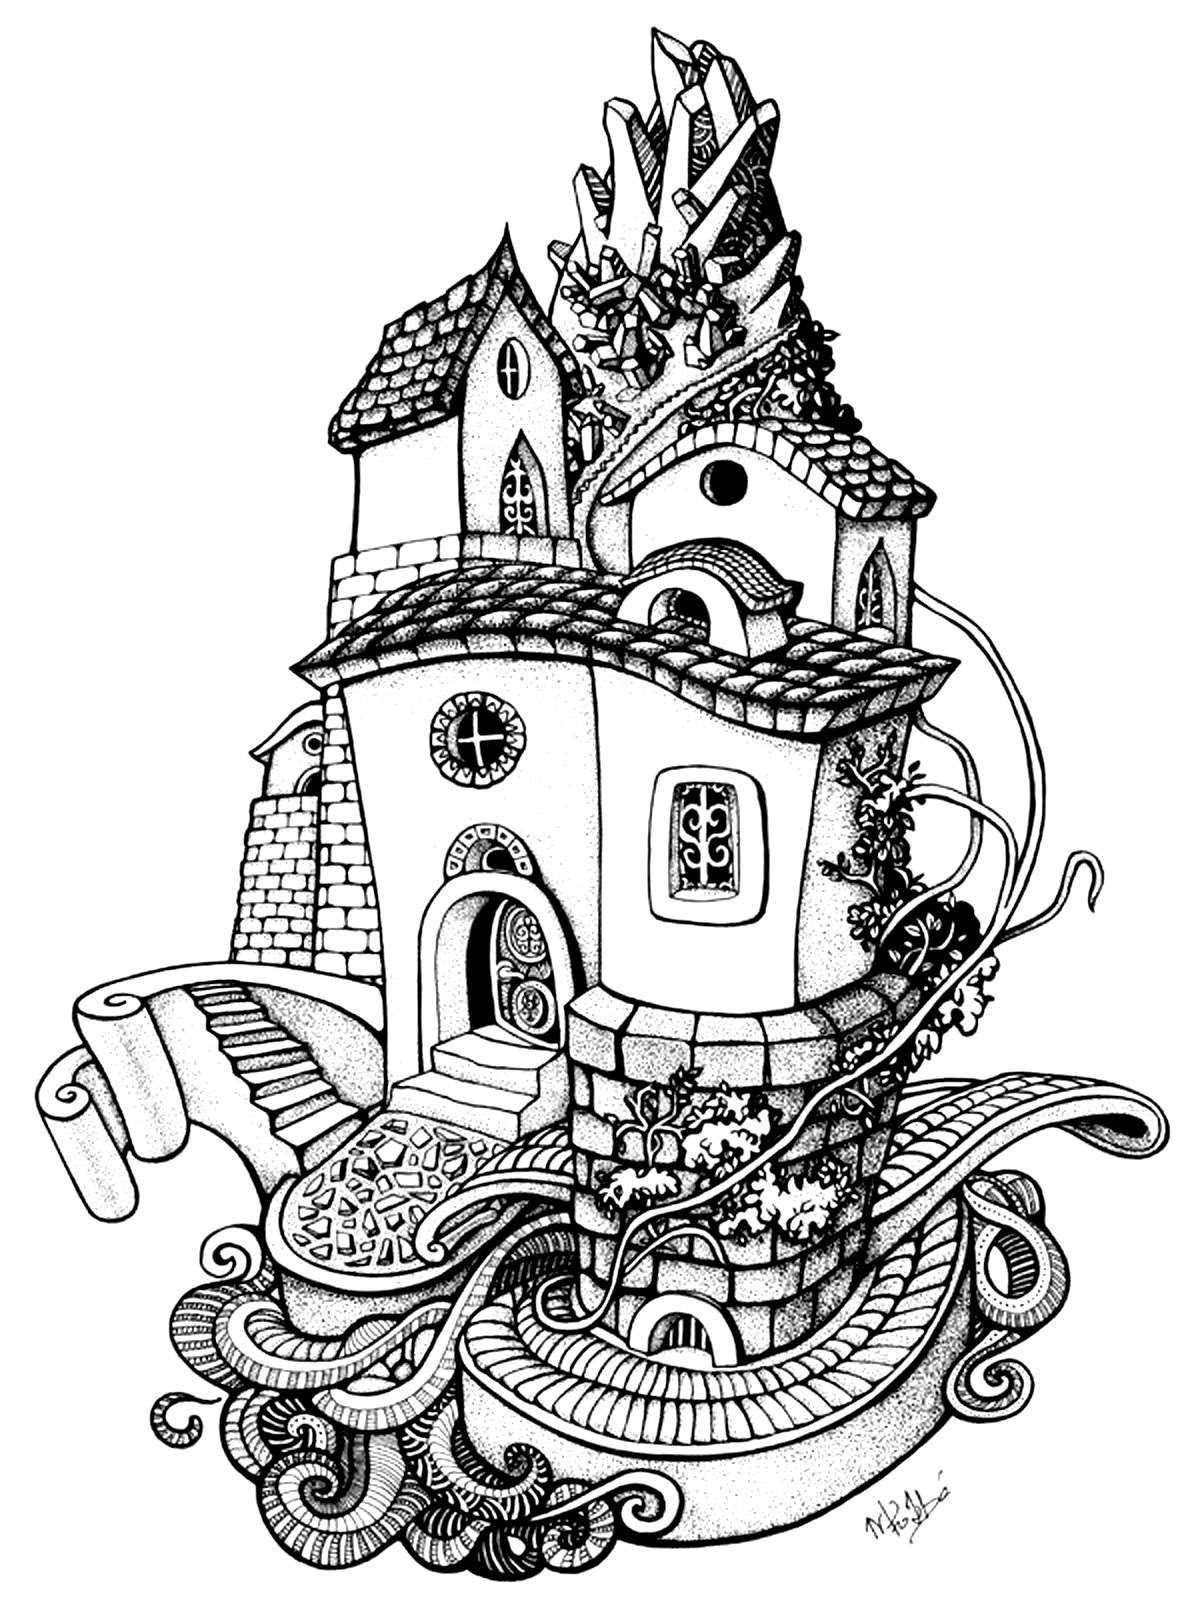 Download Architecture house rounded - Architecture Adult Coloring ...